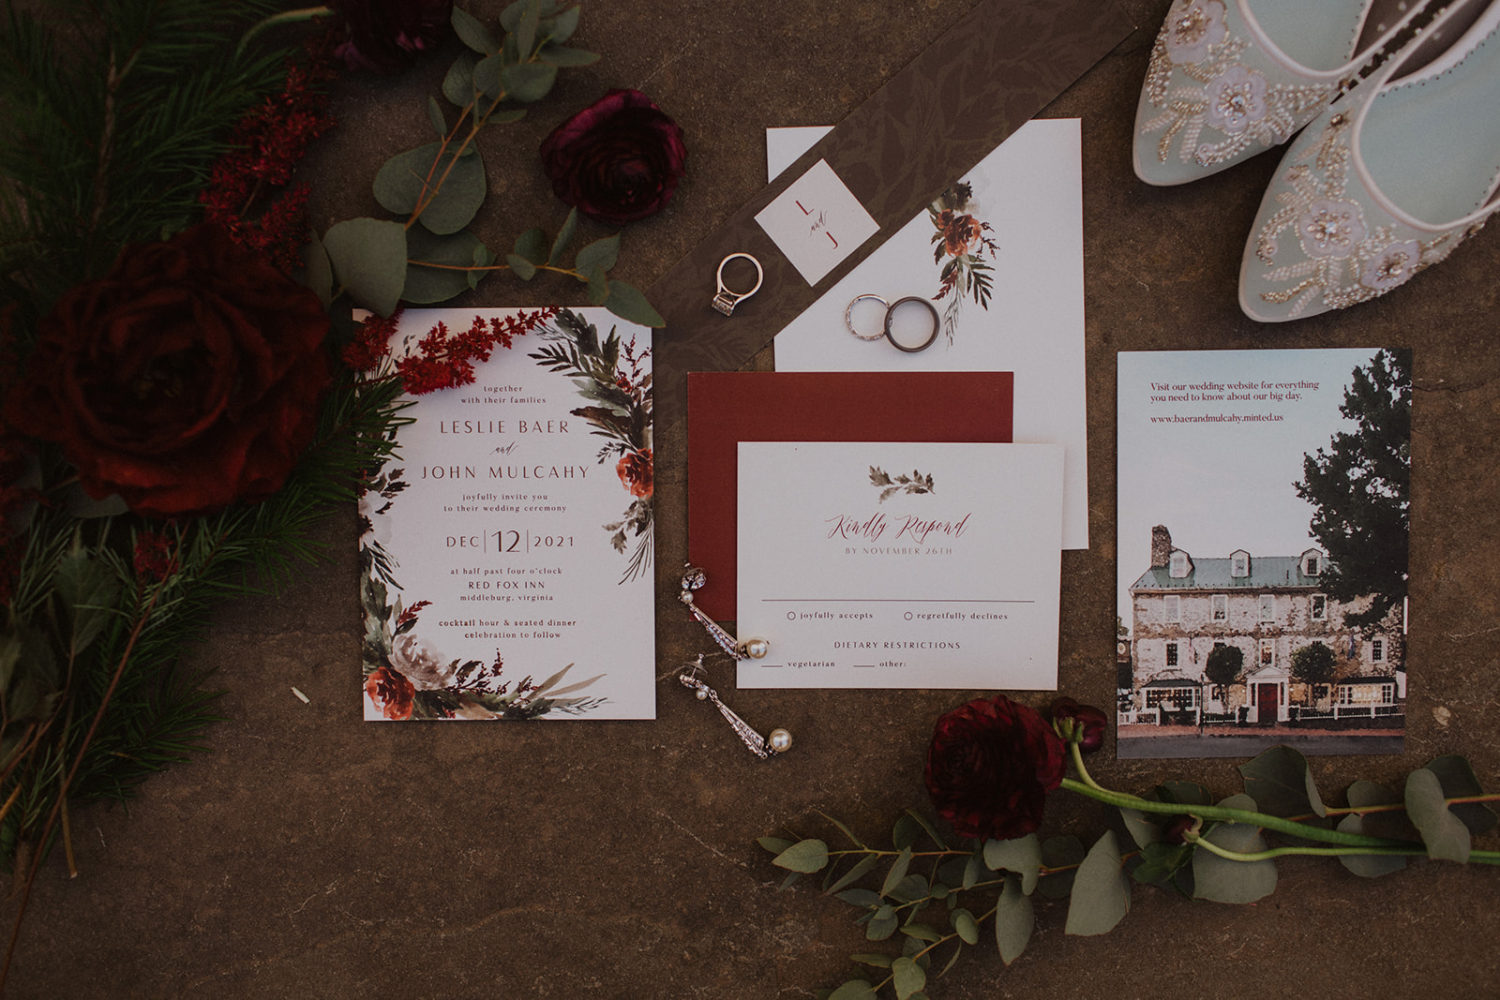 Flat lay of wedding invitation, rings, and accessories at festive winter wedding